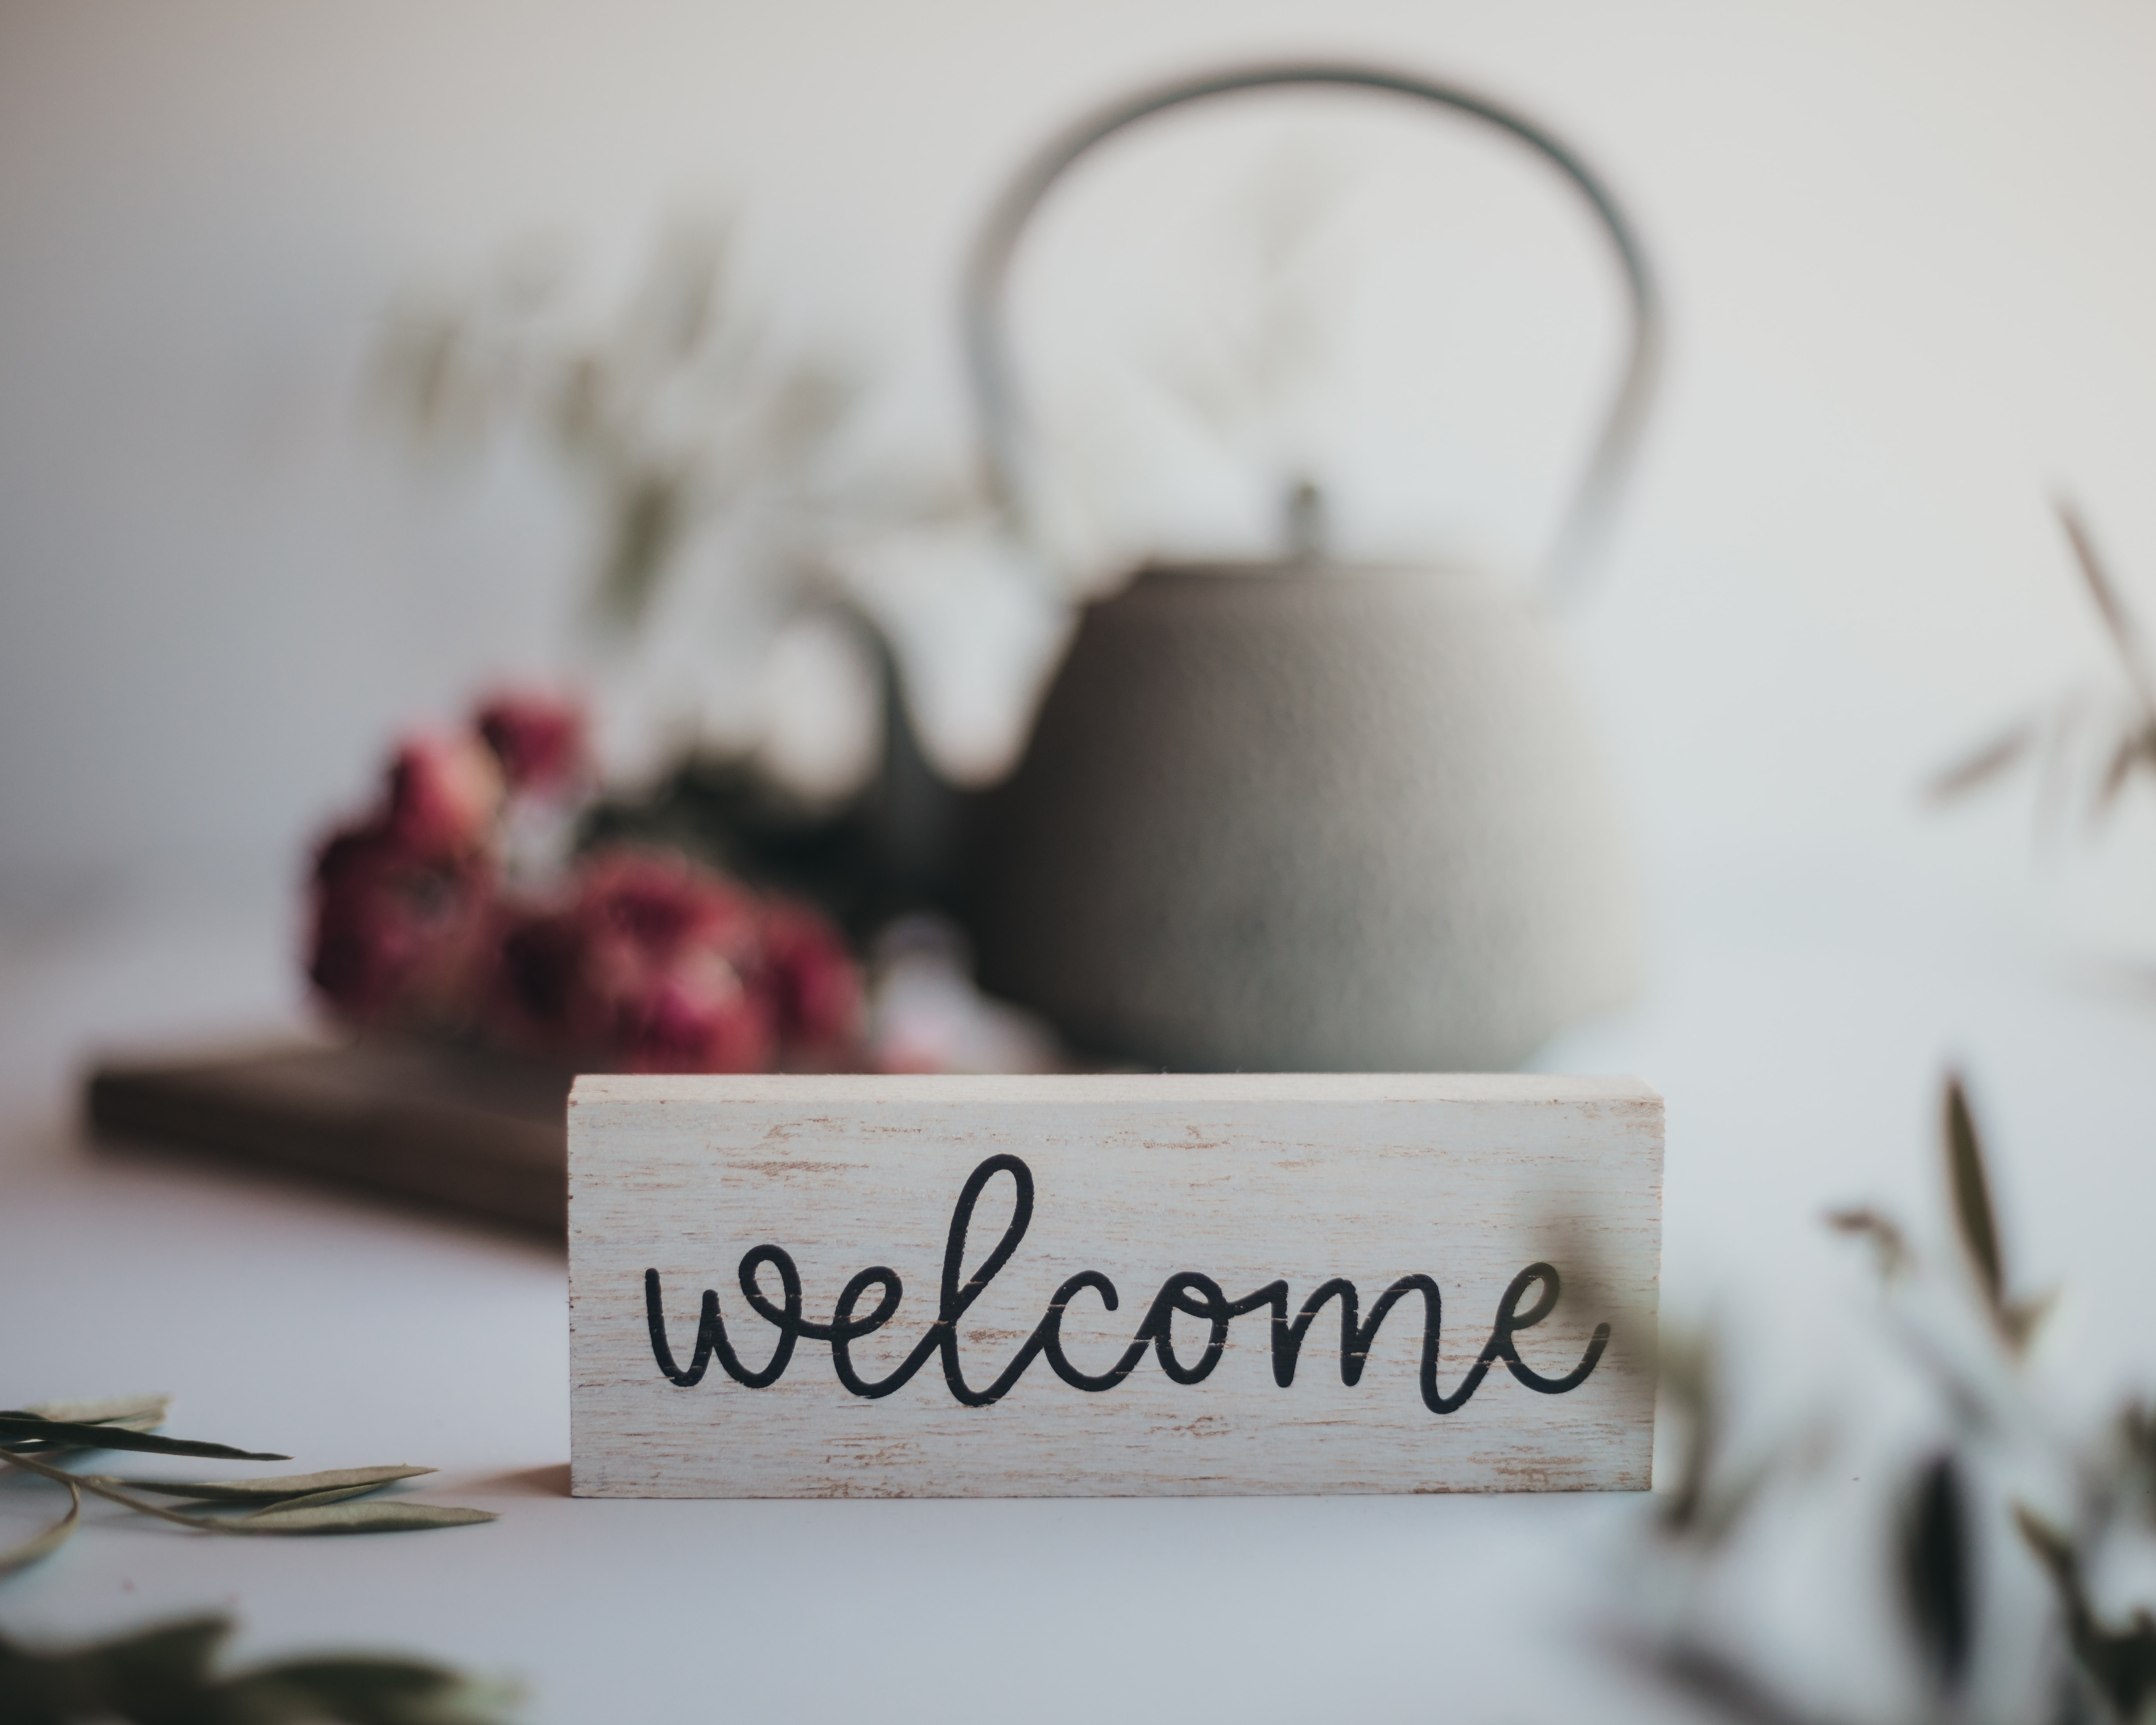 Black cursive 'welcome' written on a piece of white wood in the foreground, with an old fashioned kettle and red flowers blurred in the background.